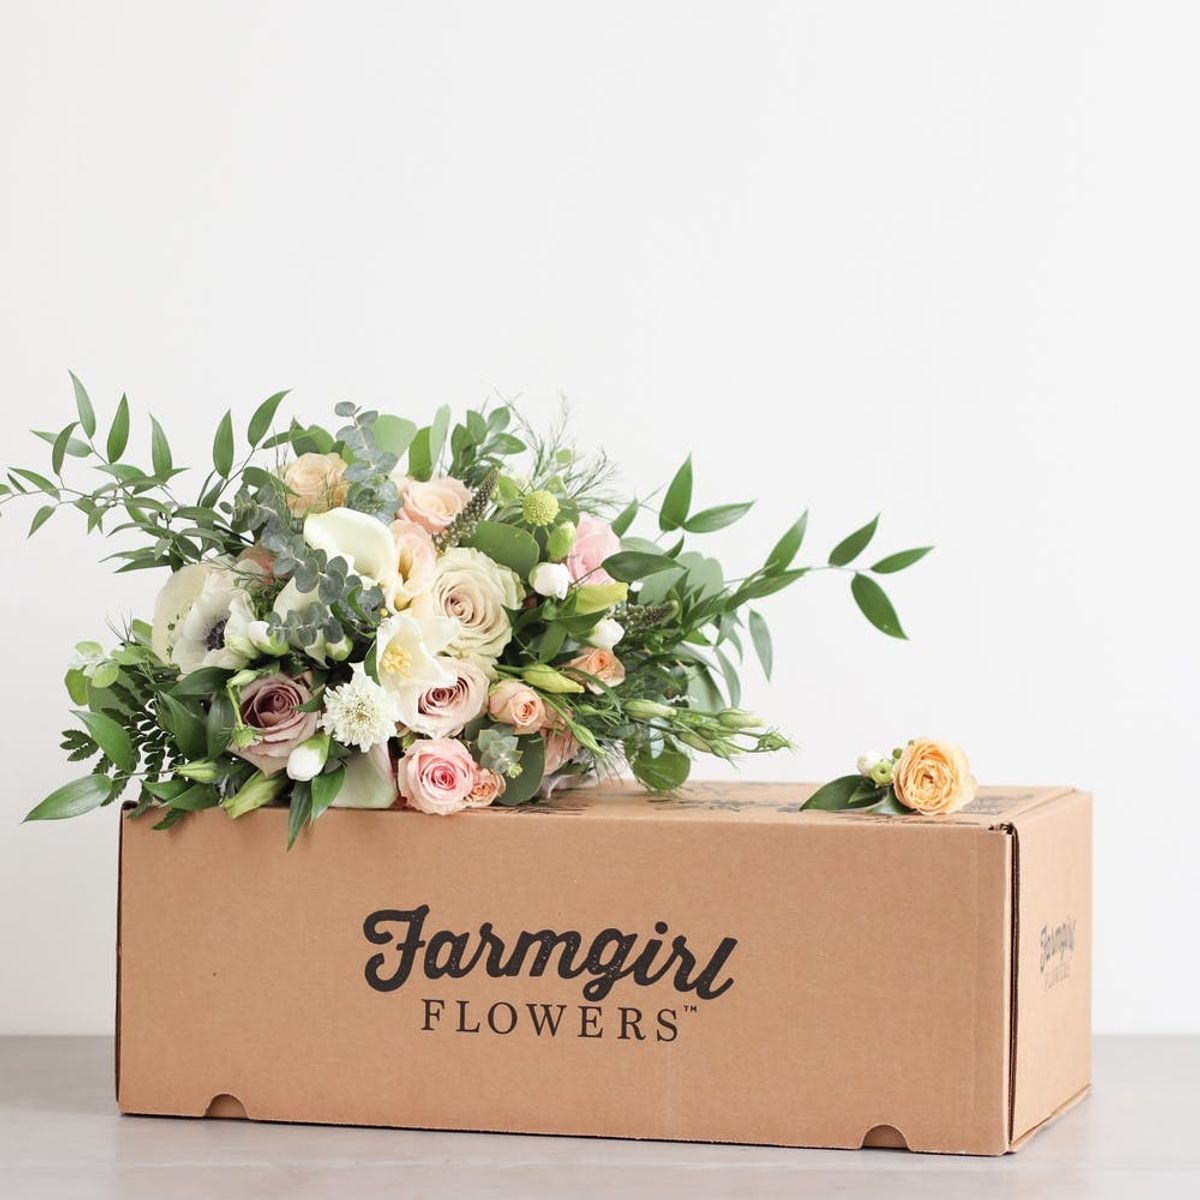 Our Fave Flower Delivery Service Just Made Wedding Planning So Much Easier